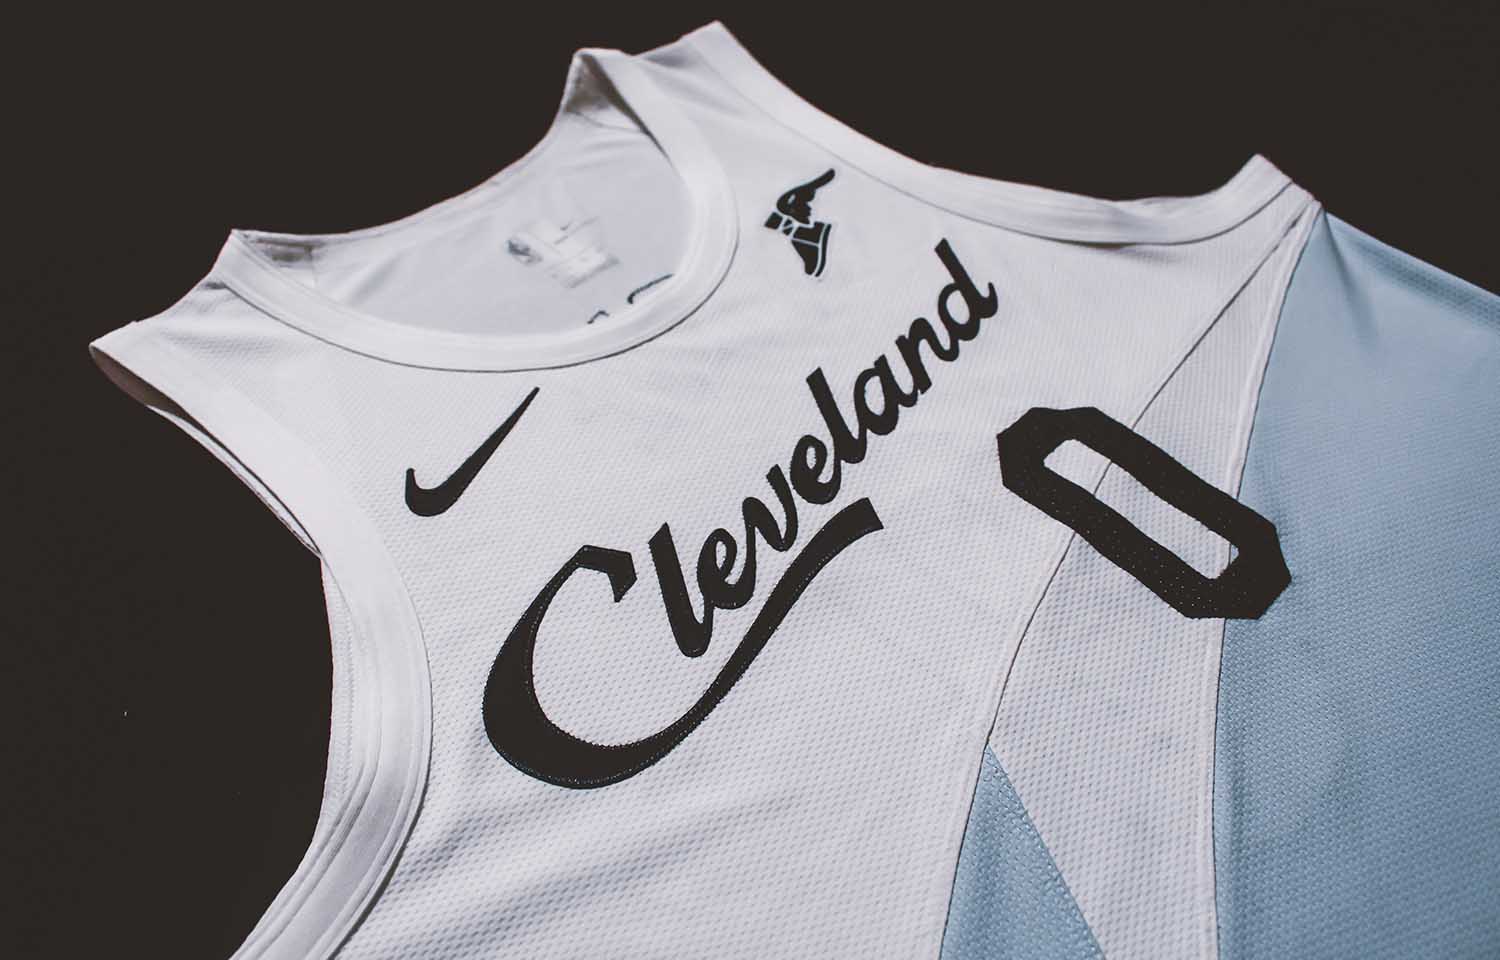 Cleveland Cavaliers unveil new Earned Edition jerseys